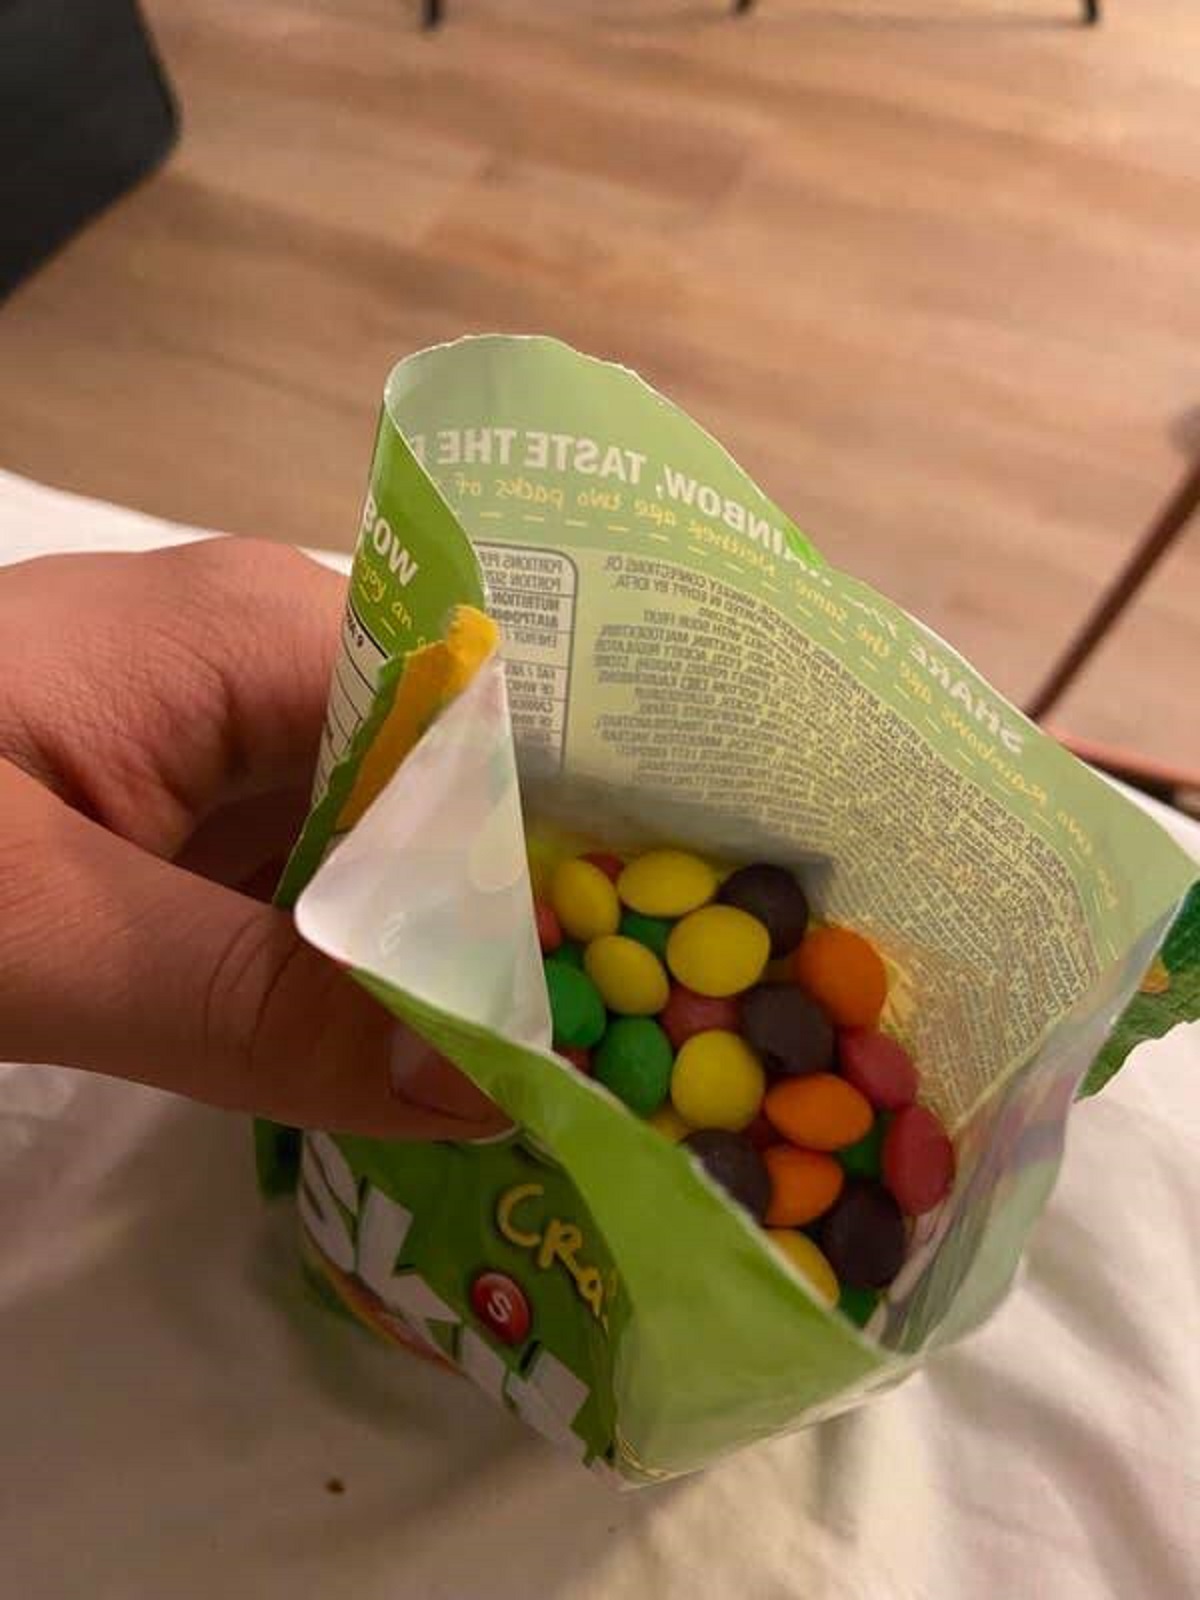 Sour Skittles in Europe don't have the iconic sour dust on them: